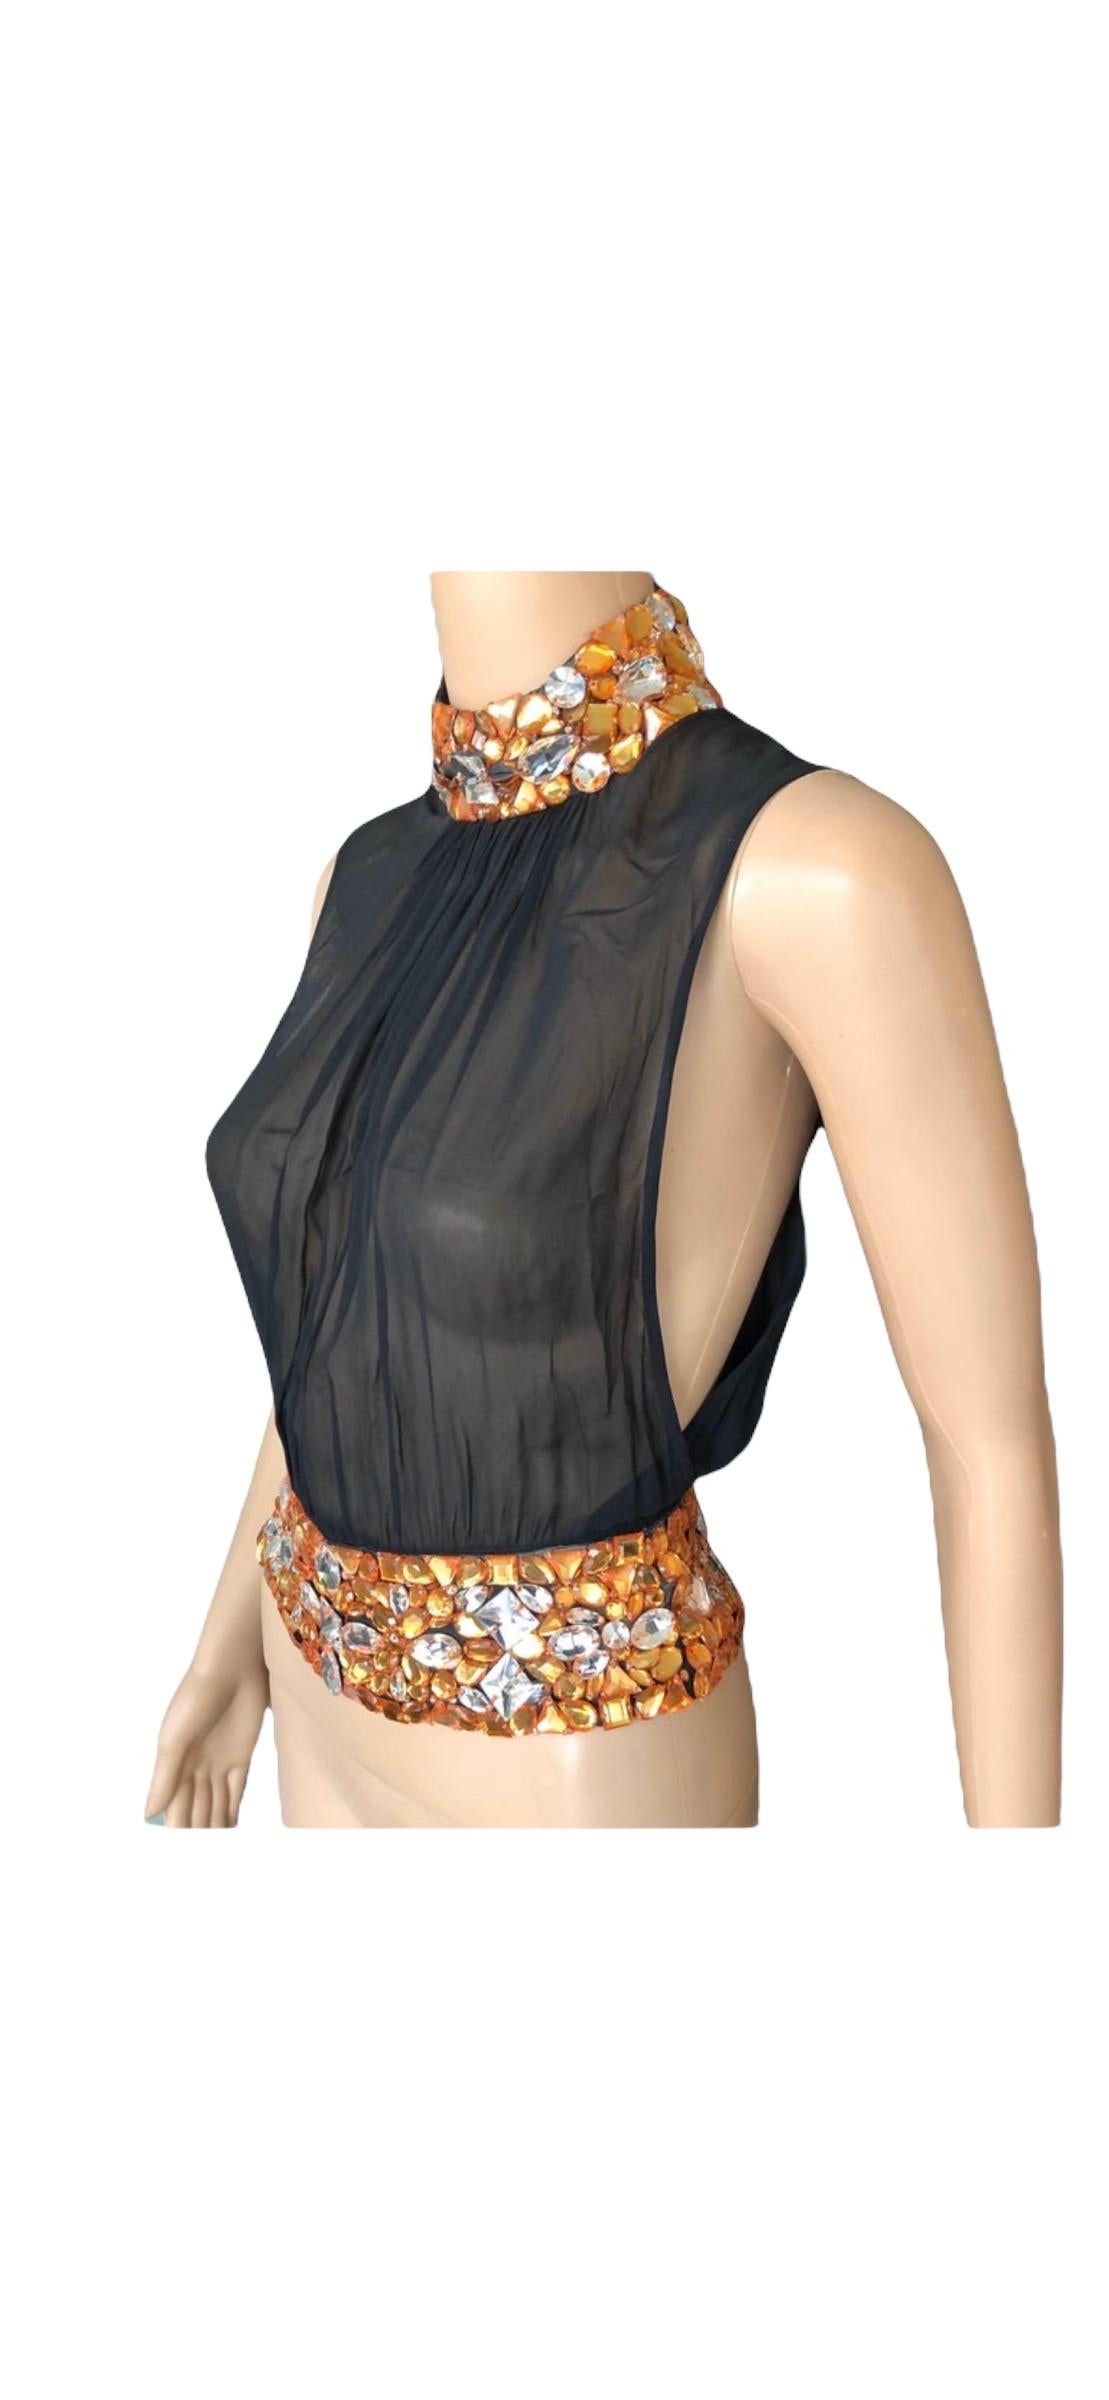 Gianni Versace Couture S/S 2000 Runway Embellished Sheer Top & Pants 2 Piece Set For Sale 8